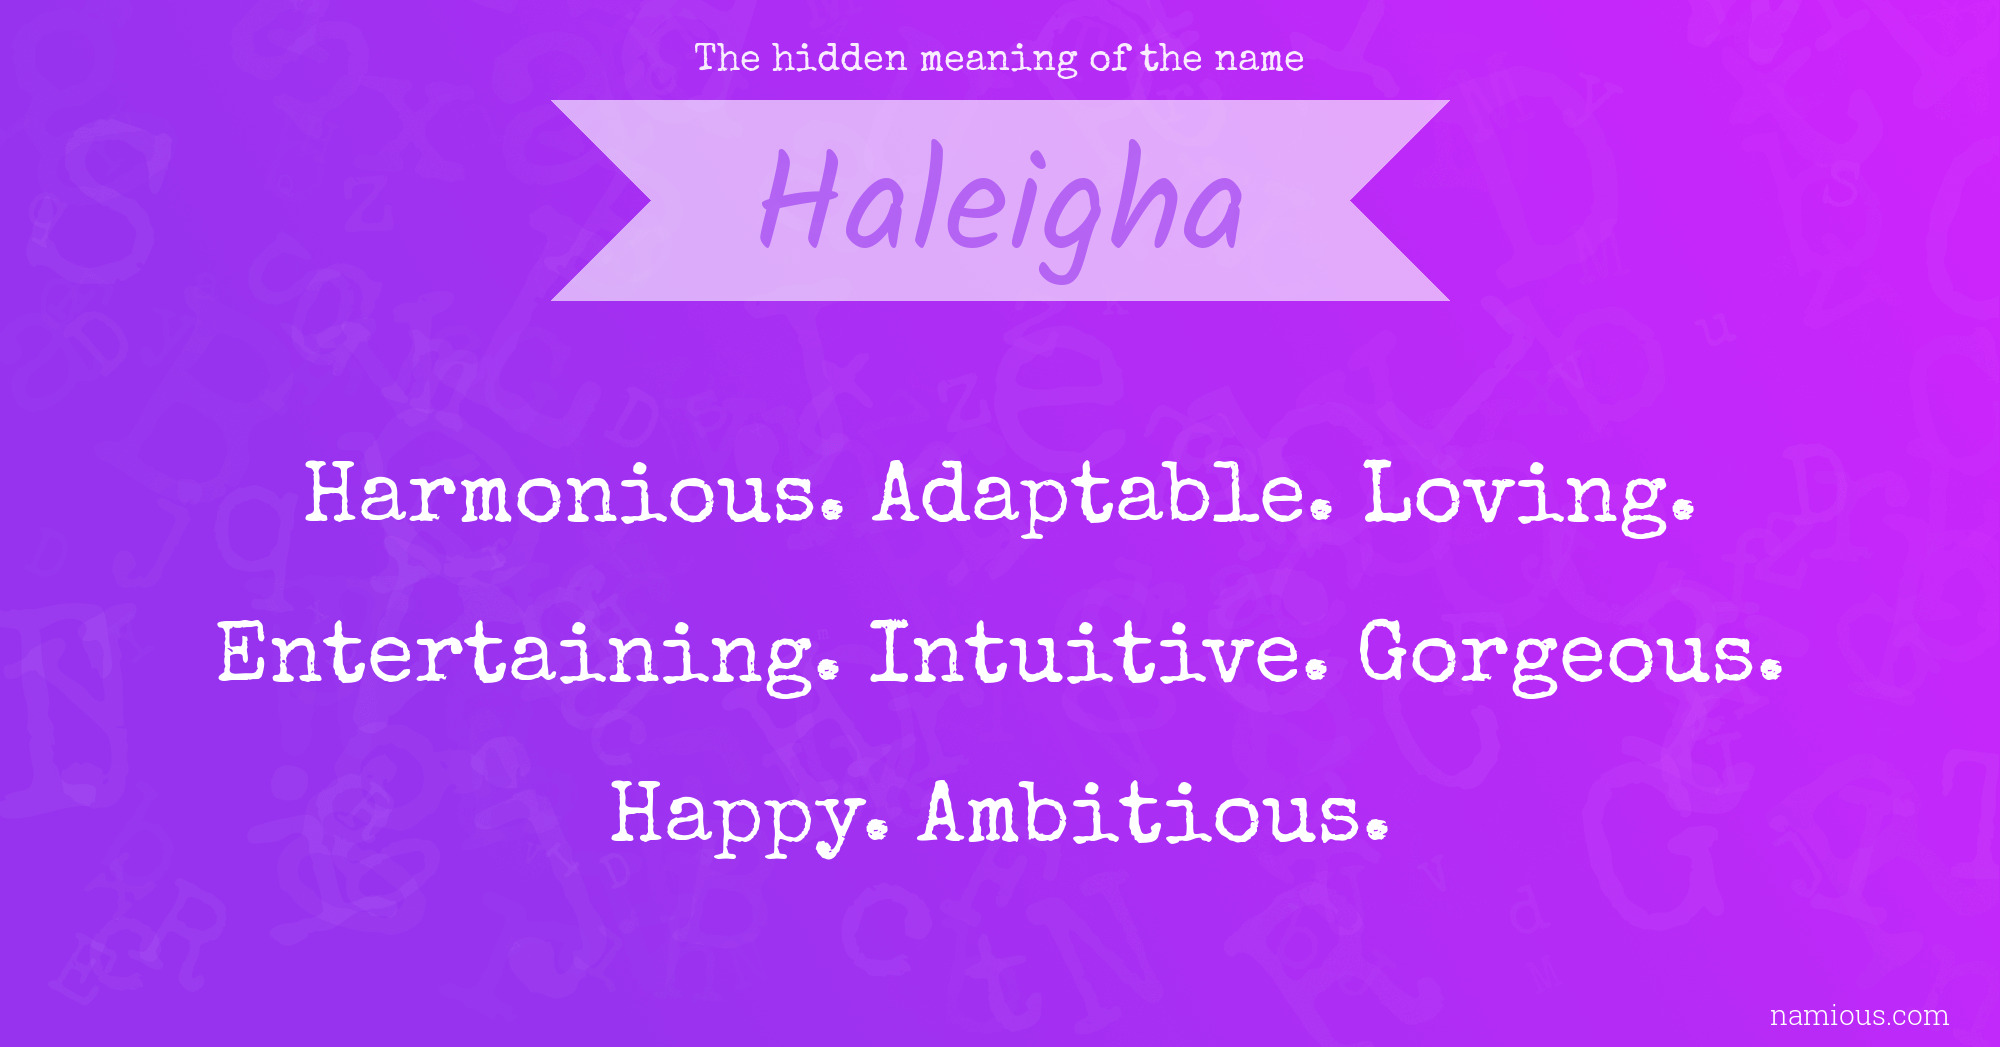 The hidden meaning of the name Haleigha